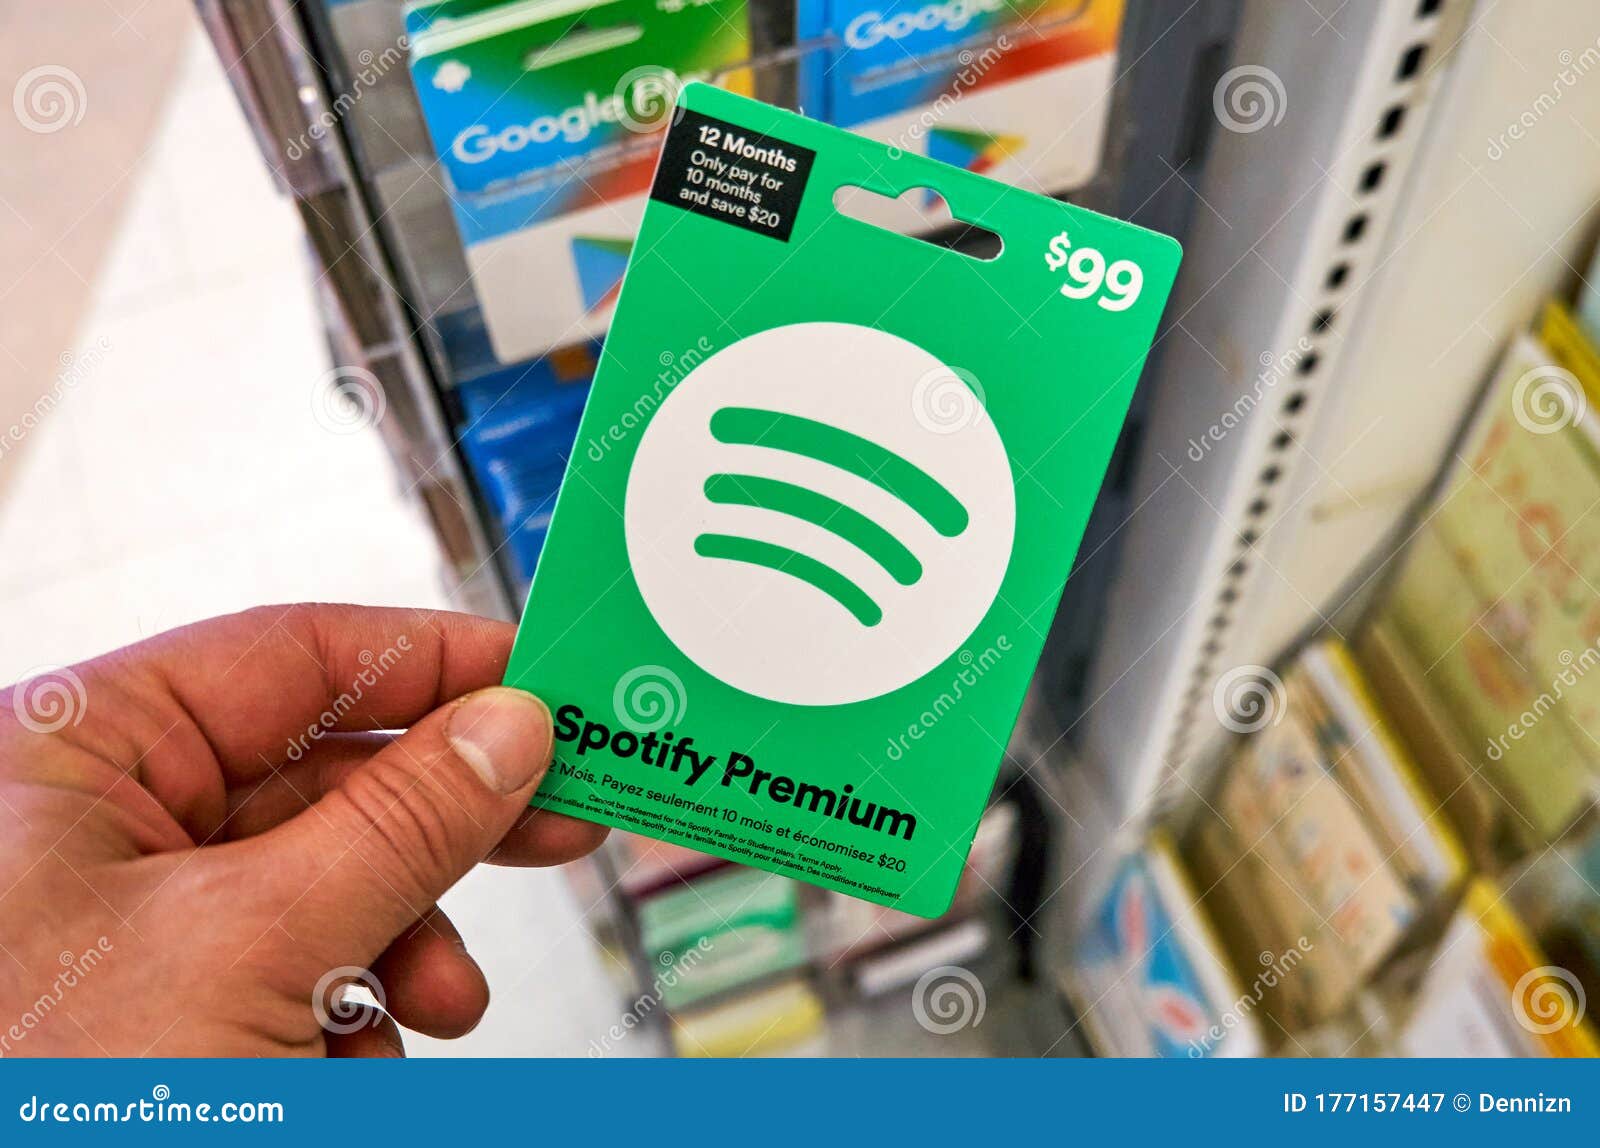  Spotify Premium 12 Month Subscription $99 Father's Day  eGift Card: Gift Cards